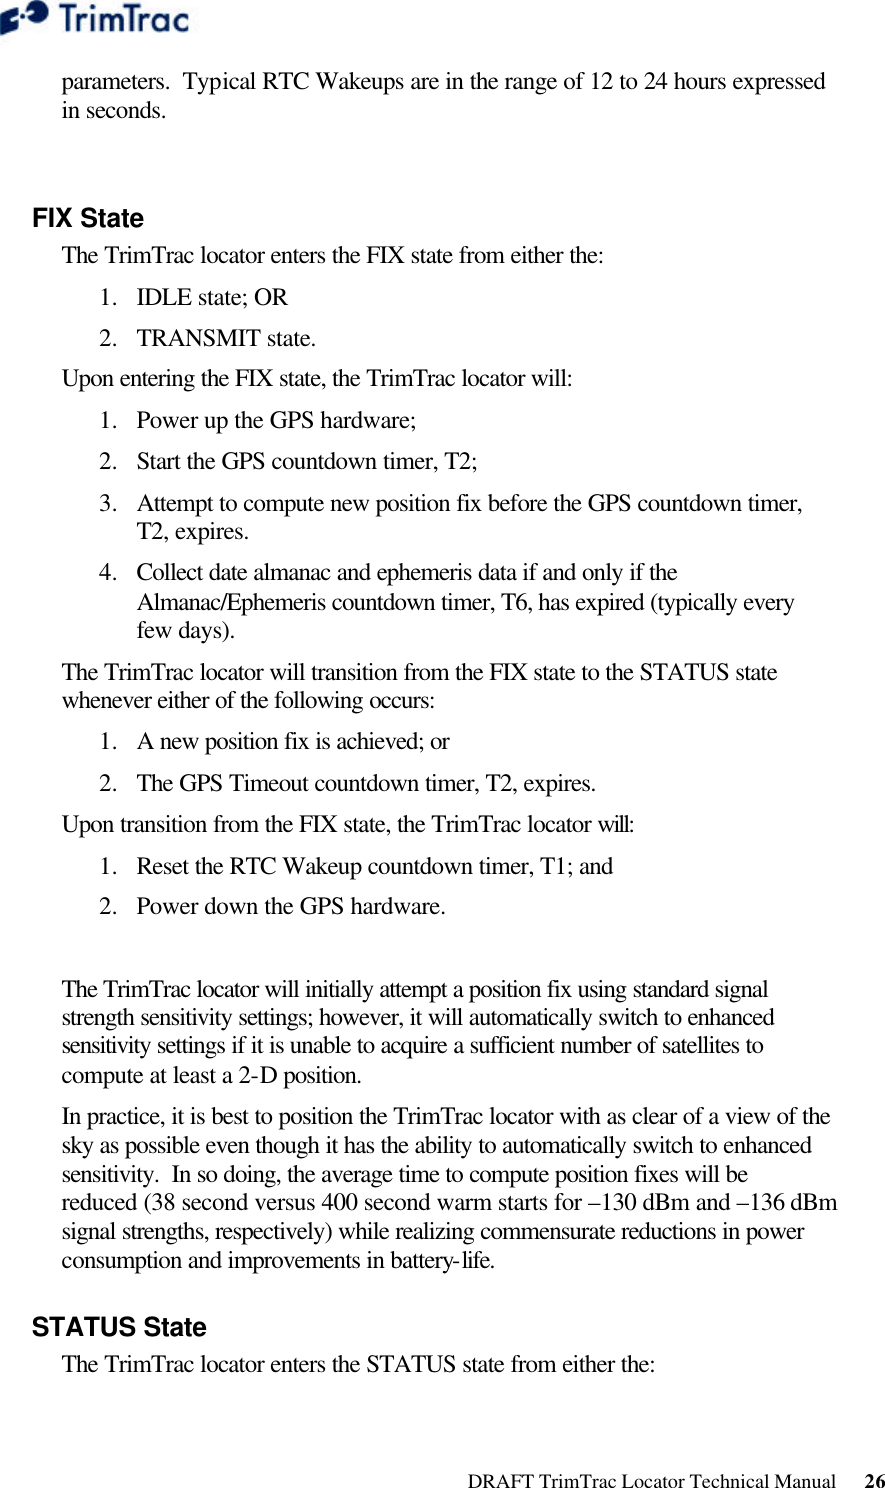  DRAFT TrimTrac Locator Technical Manual      26 parameters.  Typical RTC Wakeups are in the range of 12 to 24 hours expressed in seconds.  FIX State The TrimTrac locator enters the FIX state from either the: 1.  IDLE state; OR 2.  TRANSMIT state.  Upon entering the FIX state, the TrimTrac locator will: 1.  Power up the GPS hardware; 2.  Start the GPS countdown timer, T2; 3.  Attempt to compute new position fix before the GPS countdown timer, T2, expires. 4.  Collect date almanac and ephemeris data if and only if the Almanac/Ephemeris countdown timer, T6, has expired (typically every few days). The TrimTrac locator will transition from the FIX state to the STATUS state whenever either of the following occurs: 1.  A new position fix is achieved; or 2.  The GPS Timeout countdown timer, T2, expires. Upon transition from the FIX state, the TrimTrac locator will: 1.  Reset the RTC Wakeup countdown timer, T1; and 2.  Power down the GPS hardware.  The TrimTrac locator will initially attempt a position fix using standard signal strength sensitivity settings; however, it will automatically switch to enhanced sensitivity settings if it is unable to acquire a sufficient number of satellites to compute at least a 2-D position. In practice, it is best to position the TrimTrac locator with as clear of a view of the sky as possible even though it has the ability to automatically switch to enhanced sensitivity.  In so doing, the average time to compute position fixes will be reduced (38 second versus 400 second warm starts for –130 dBm and –136 dBm signal strengths, respectively) while realizing commensurate reductions in power consumption and improvements in battery-life. STATUS State The TrimTrac locator enters the STATUS state from either the: 